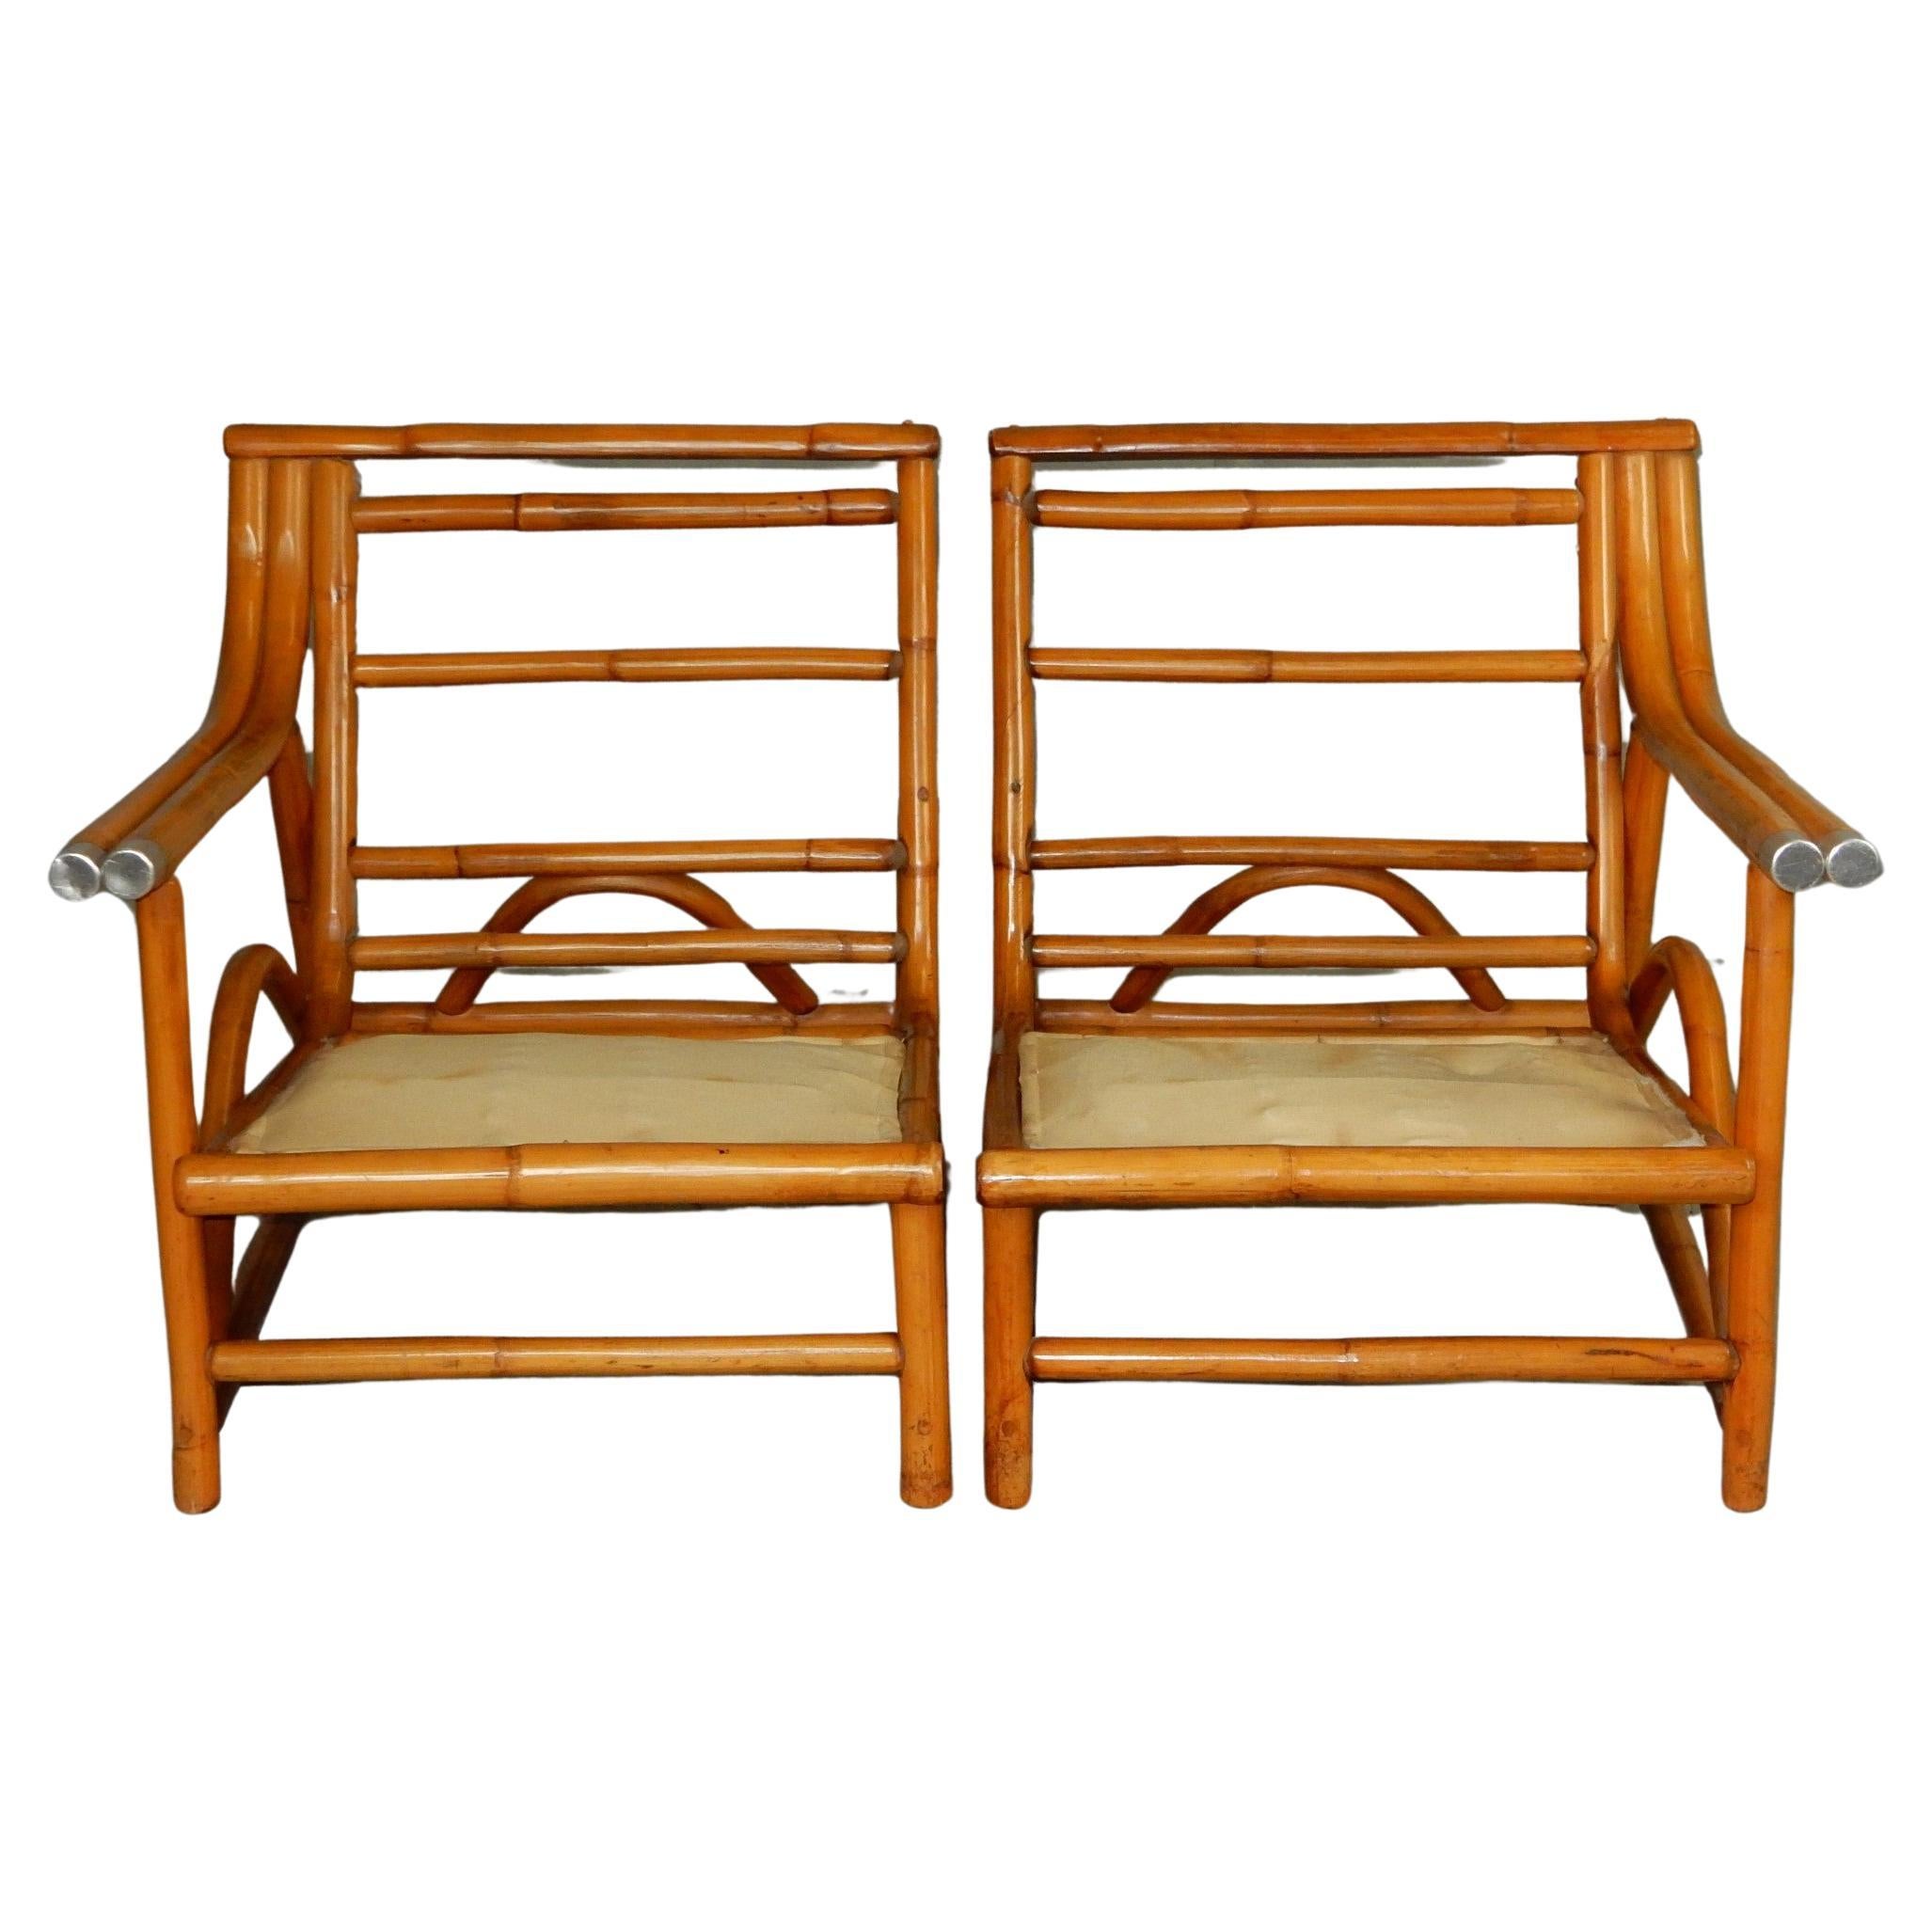 20th Century 1950's Ficks Reed Rattan Split Settee or Lounge Chairs  For Sale